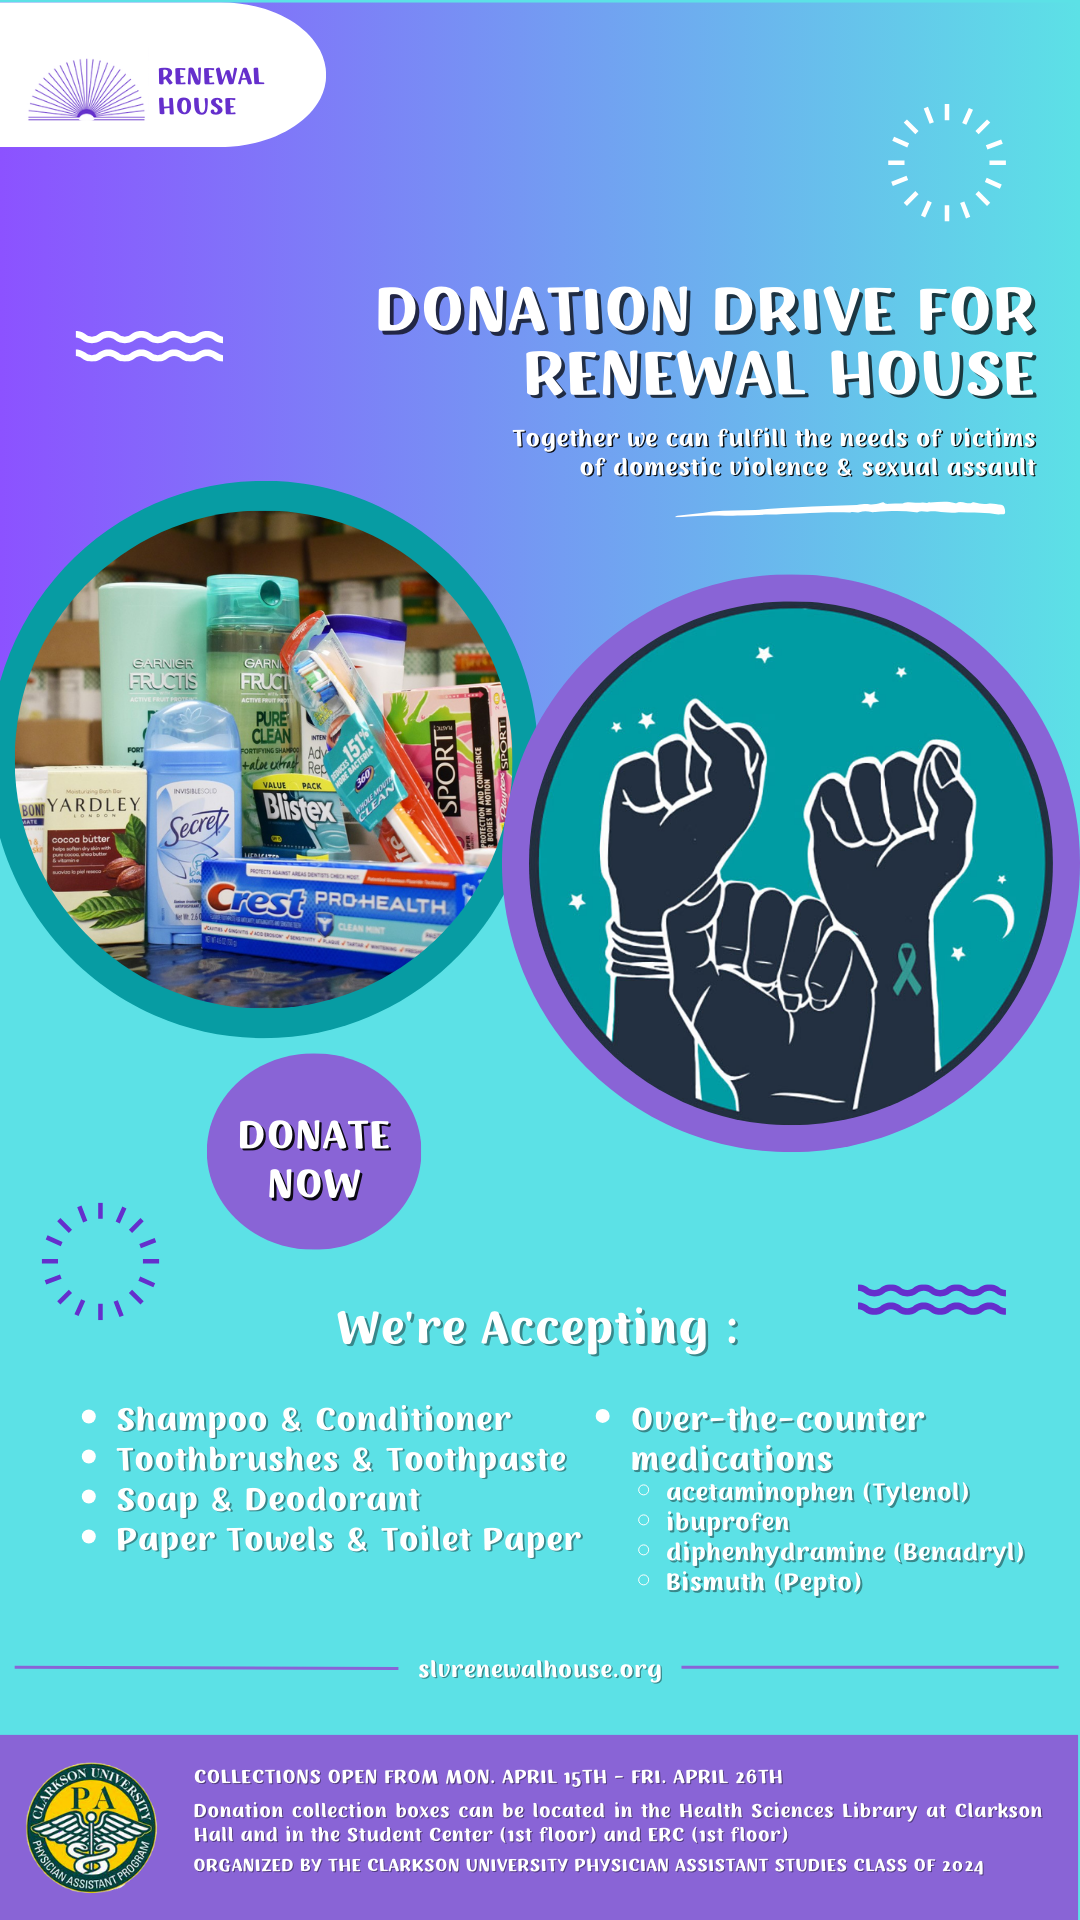 A teal and purple advertisement for a donation drive for the Renewal House. There is a message that reads “together we can fulfill the needs of victims of domestic violence and sexual assault.” There is an image of personal hygiene products and 3 hands raised in the air with a teal awareness ribbon for sexual assault awareness month. Text below the images read “donate now” and a list of accepted items includes shampoo, conditioner, toothbrushes, toothpaste, soap, deodorant, paper towels, toilet paper, and over the counter medications such as acetaminophen, ibuprofen, benadryl, and pepto bismuth. At the bottom of the advertisement it states collections will run from Monday, April 16th to Friday, April 26th and donation collection boxes can be located in the Health Sciences Library at Clarkson Hall and in the Student Center (1st floor) and ERC (1st floor). The advertisement was created by the Clarkson University Physician Assistant Studies Class of 2024 and the program’s logo is in the bottom left hand corner.